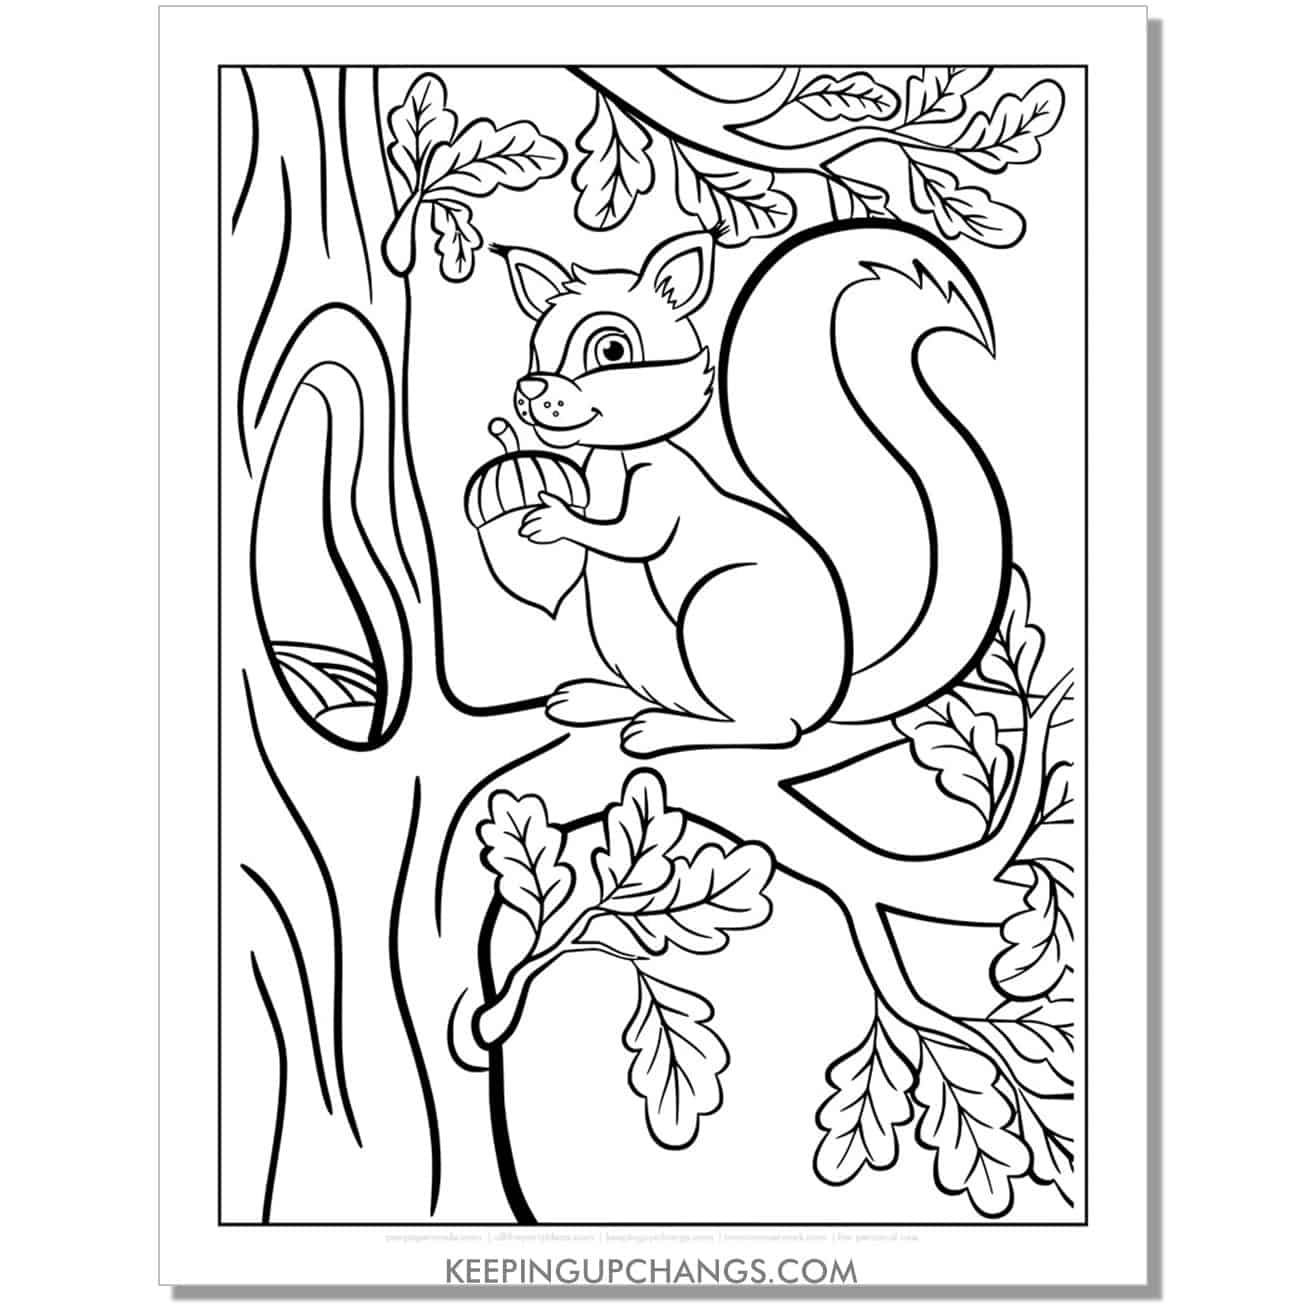 free full page squirrel in tree coloring page, sheet.